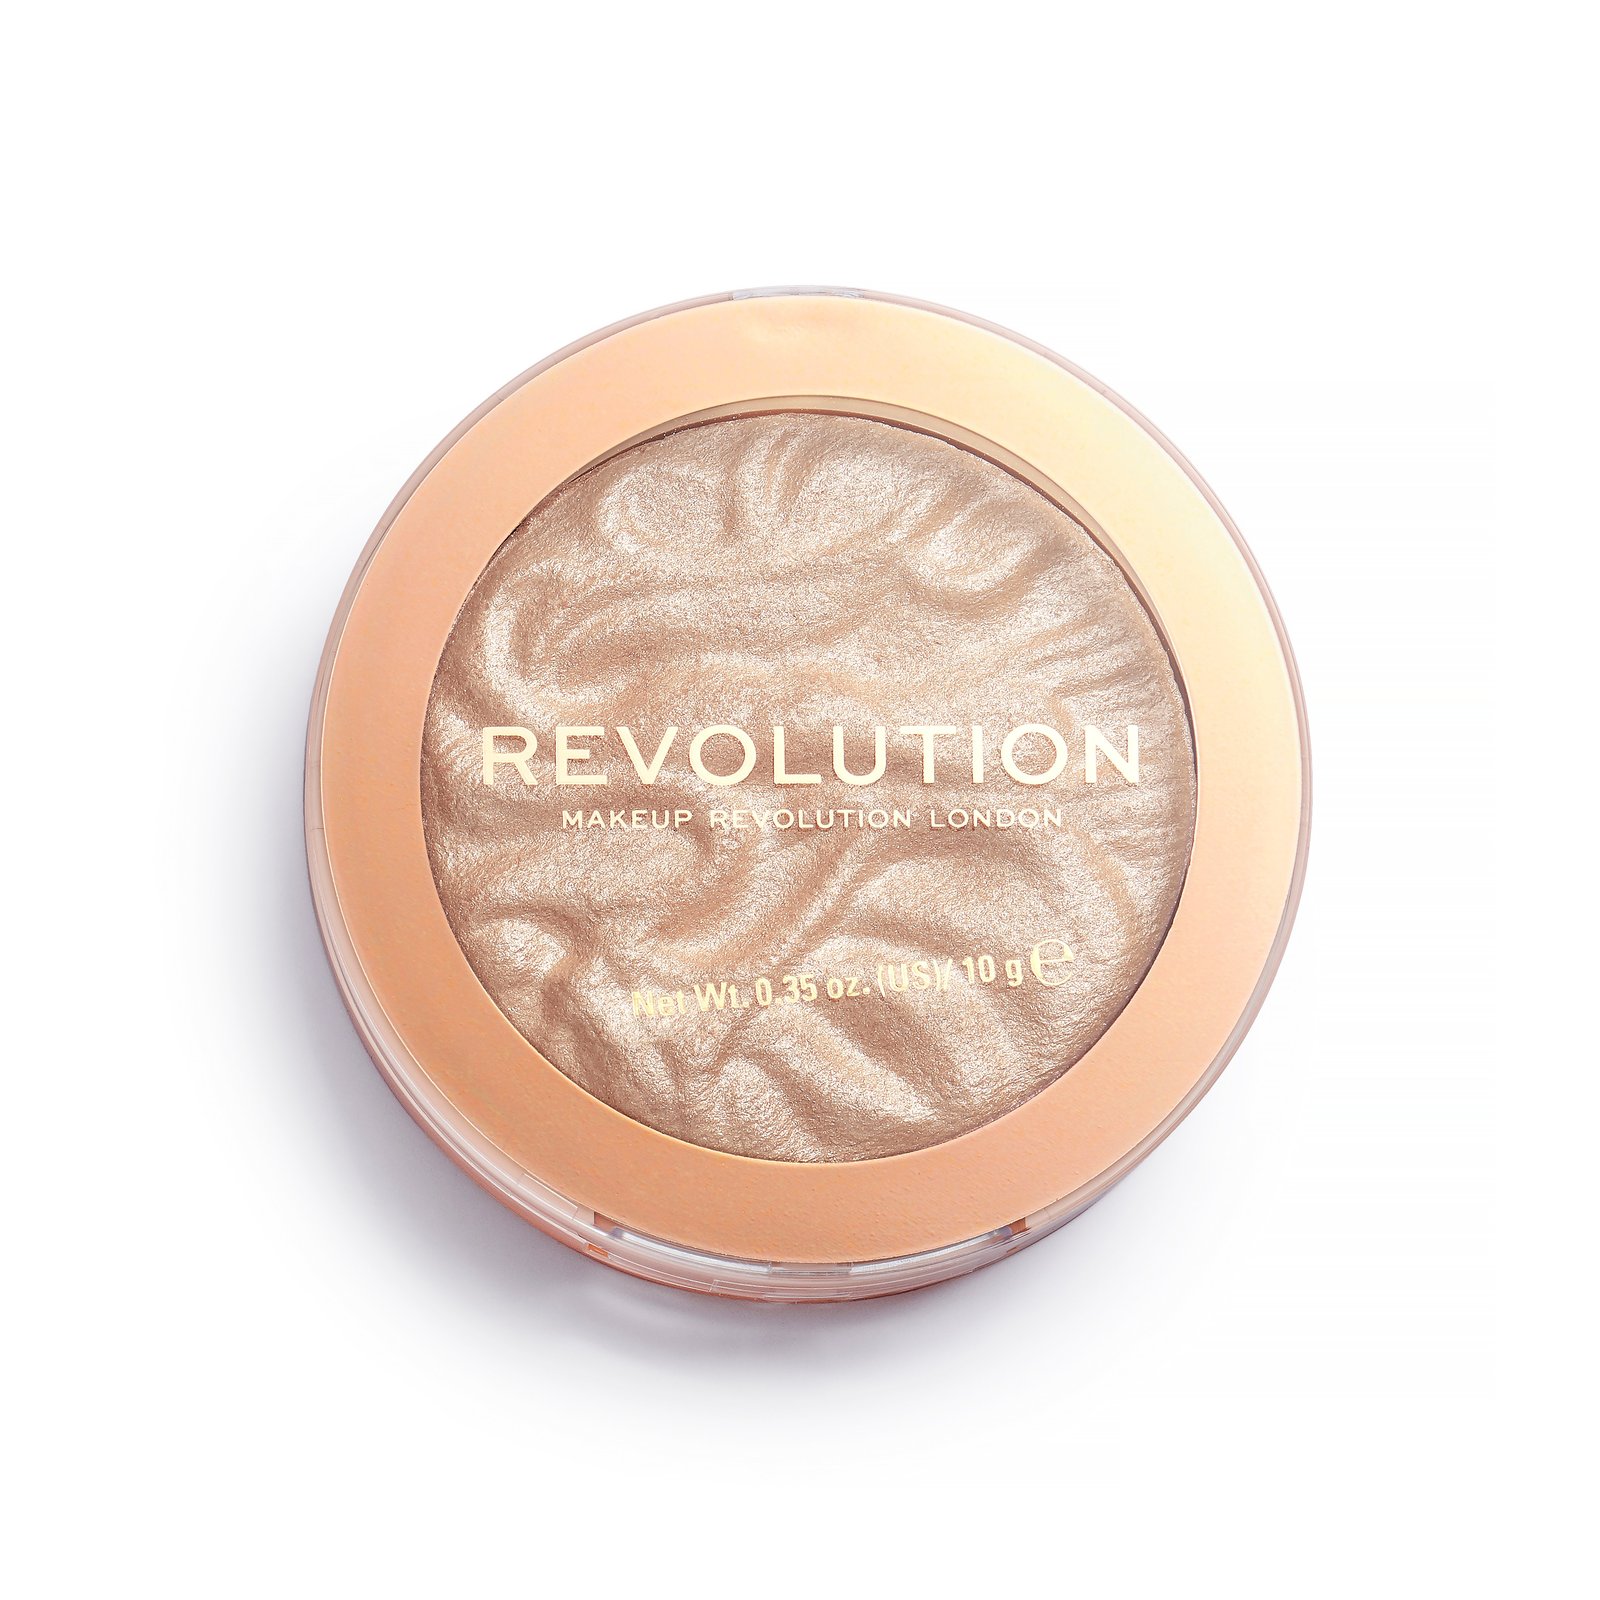 Makeup Revolution Highlight Reloaded Just My Type 10 g